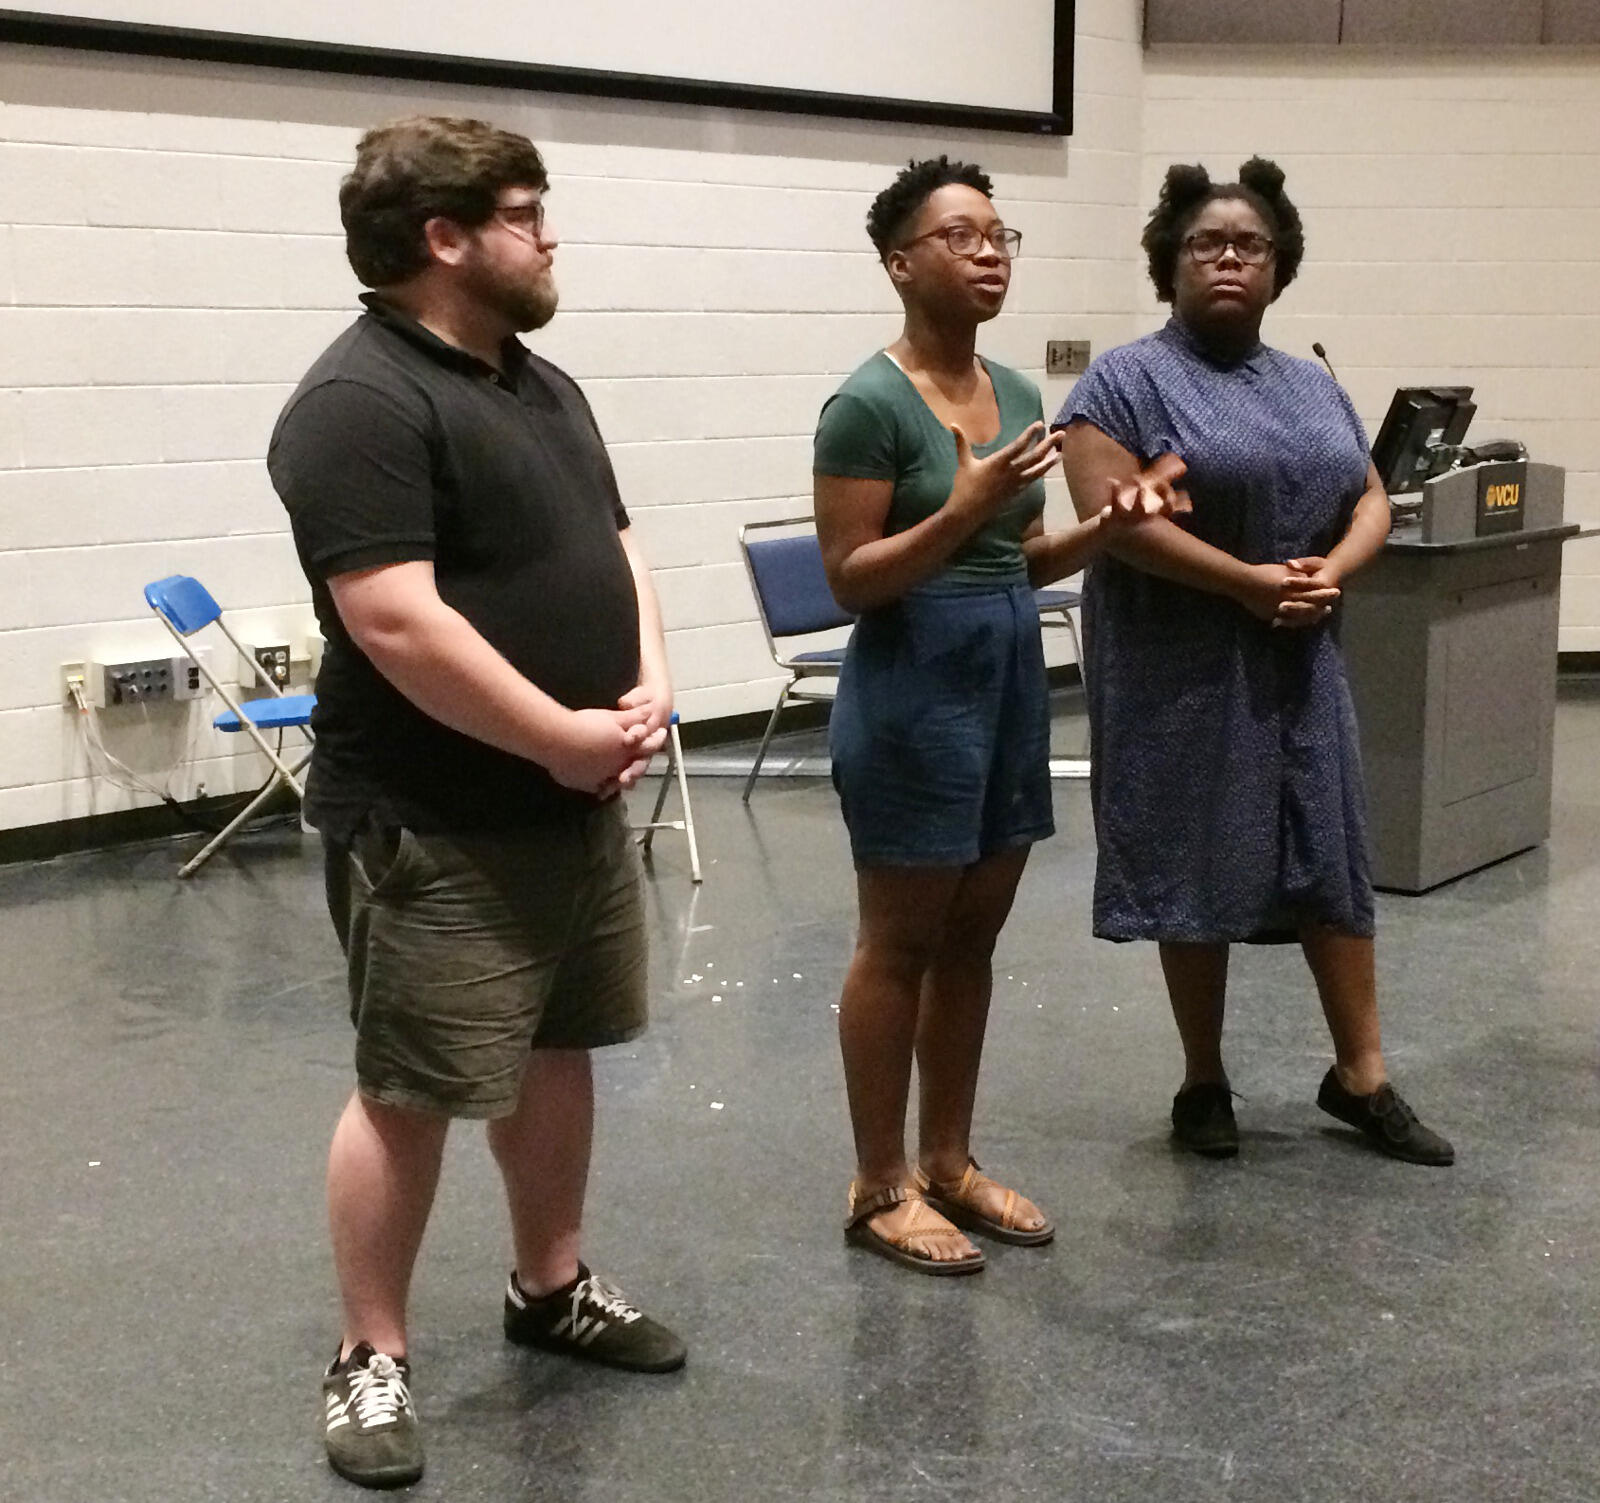 VCU student Brii Howard, center, flanked by Taneasha White and Pete Stauffer, facilitates a discussion on race and society at Thursday's event.
<br>Photo by James Irwin, University Public Affairs